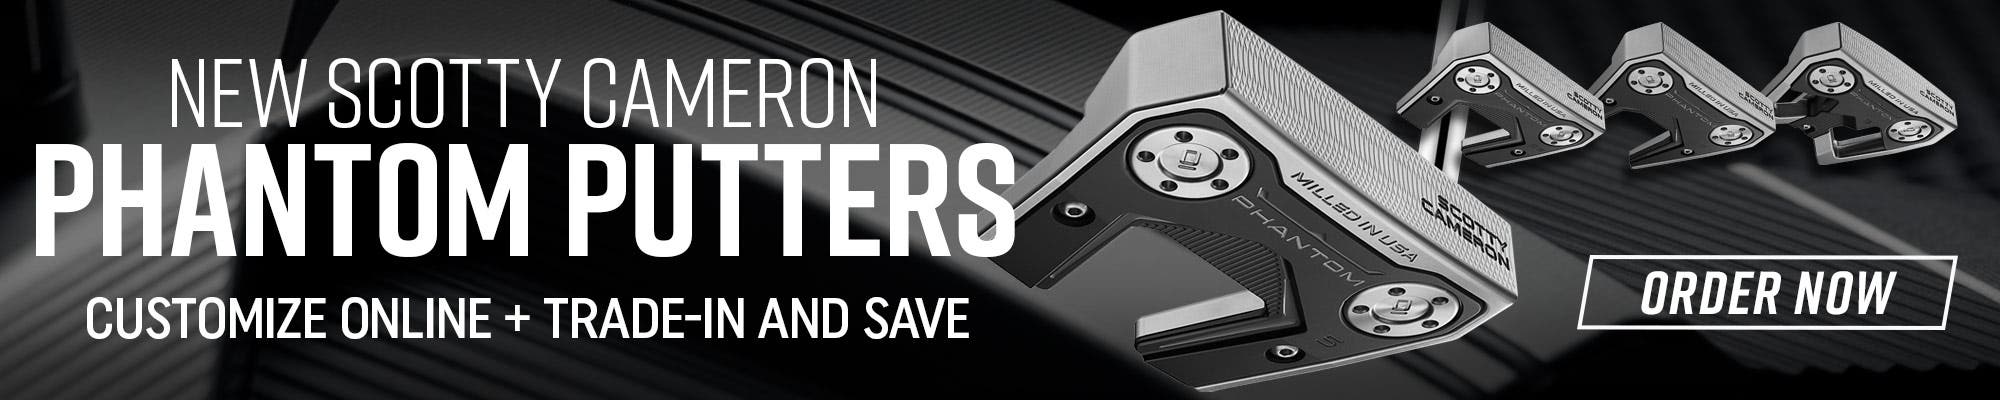 New Scotty Cameron Phantom Putters | Customize Online + Trade-In and Save | Order Now